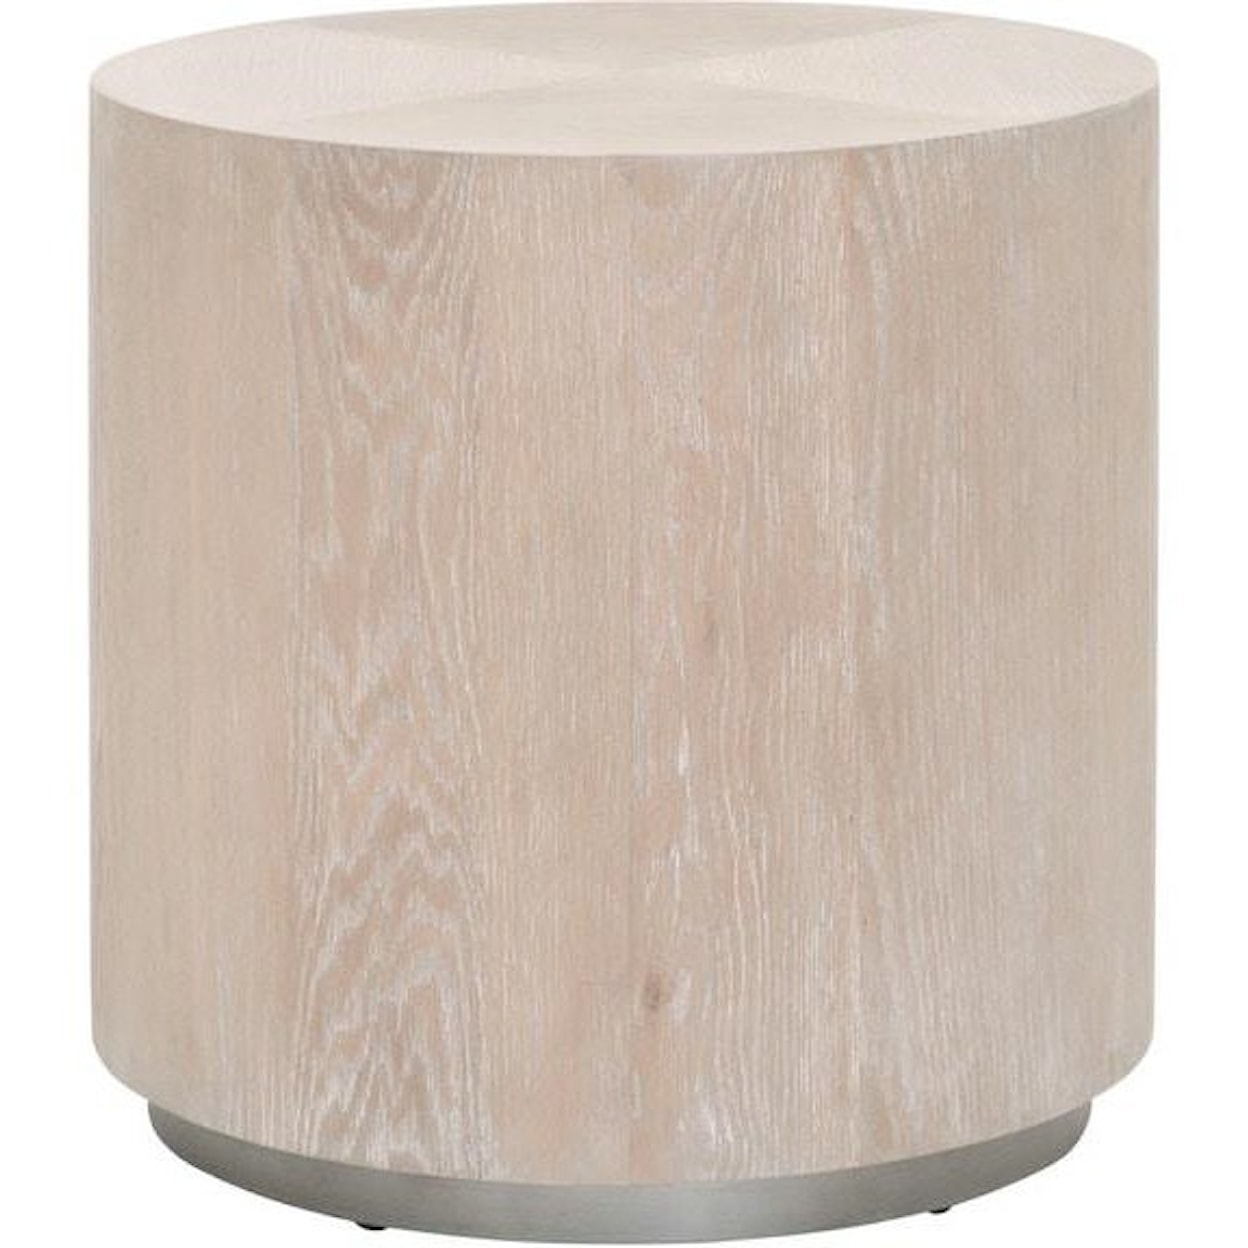 Essentials for Living Roto Roto Large End Table